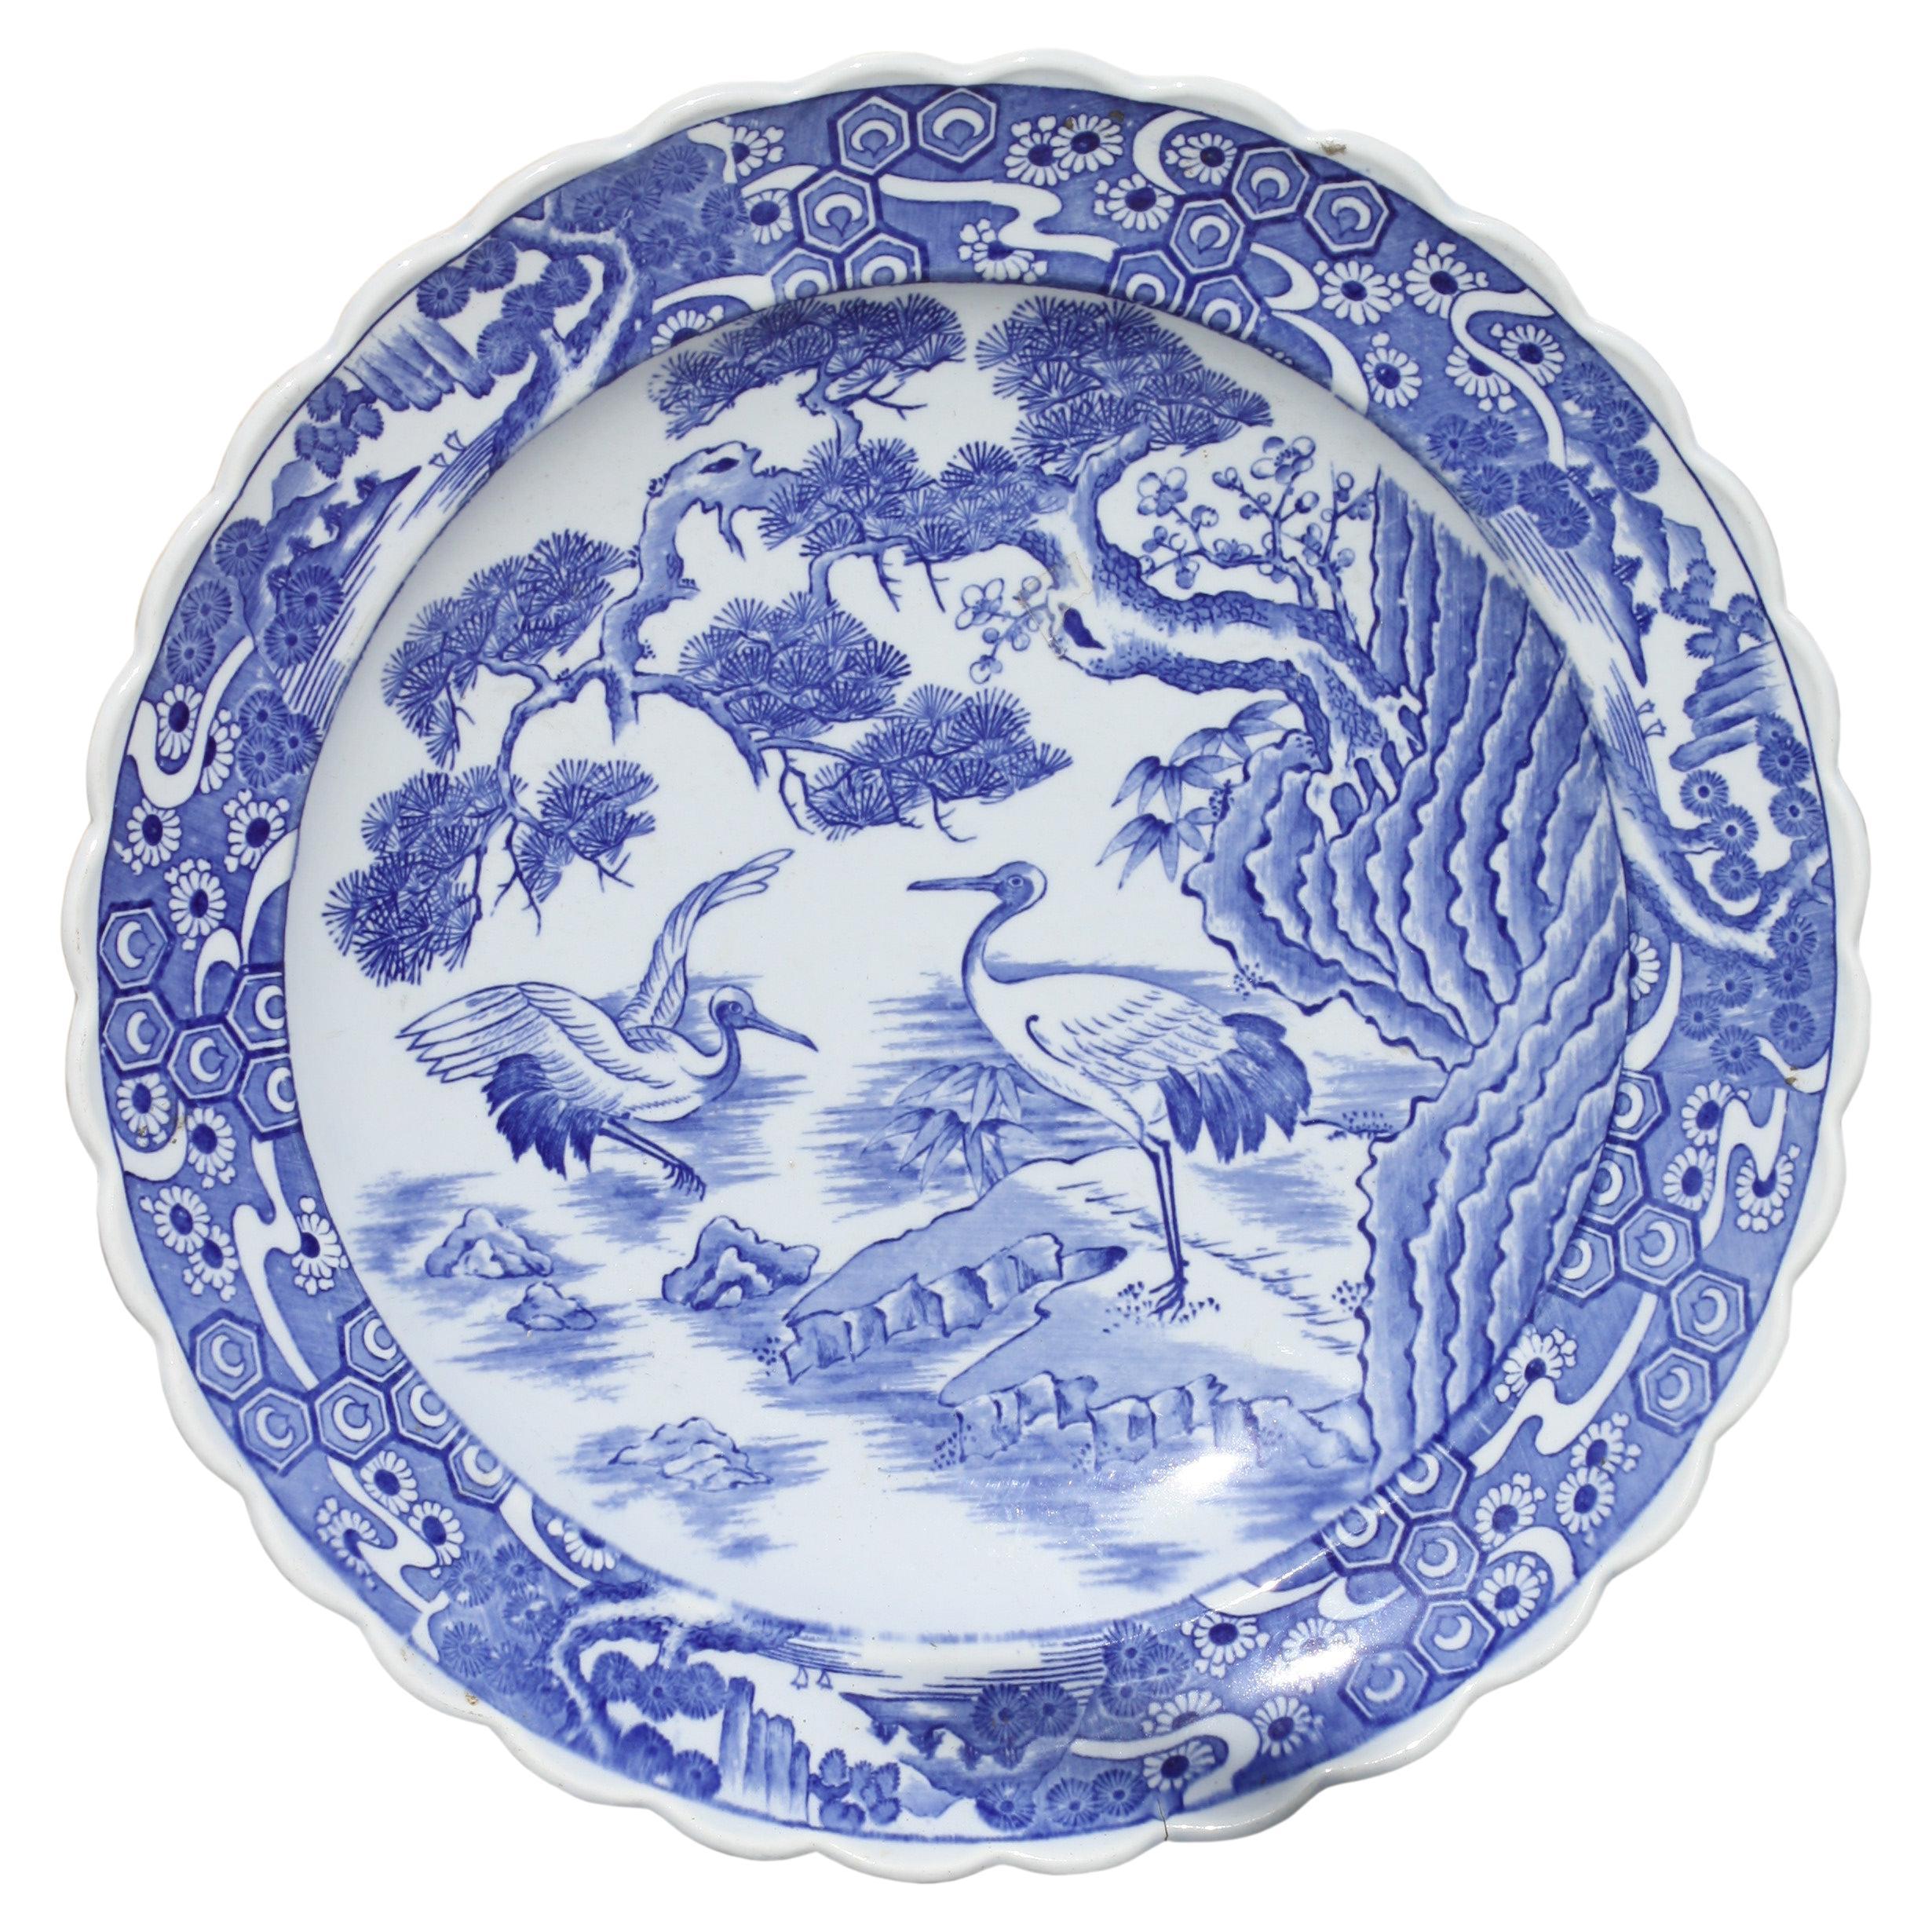 Japanese Blue and White Decorated Porcelain Plate, Meiji Period (1868-1912)